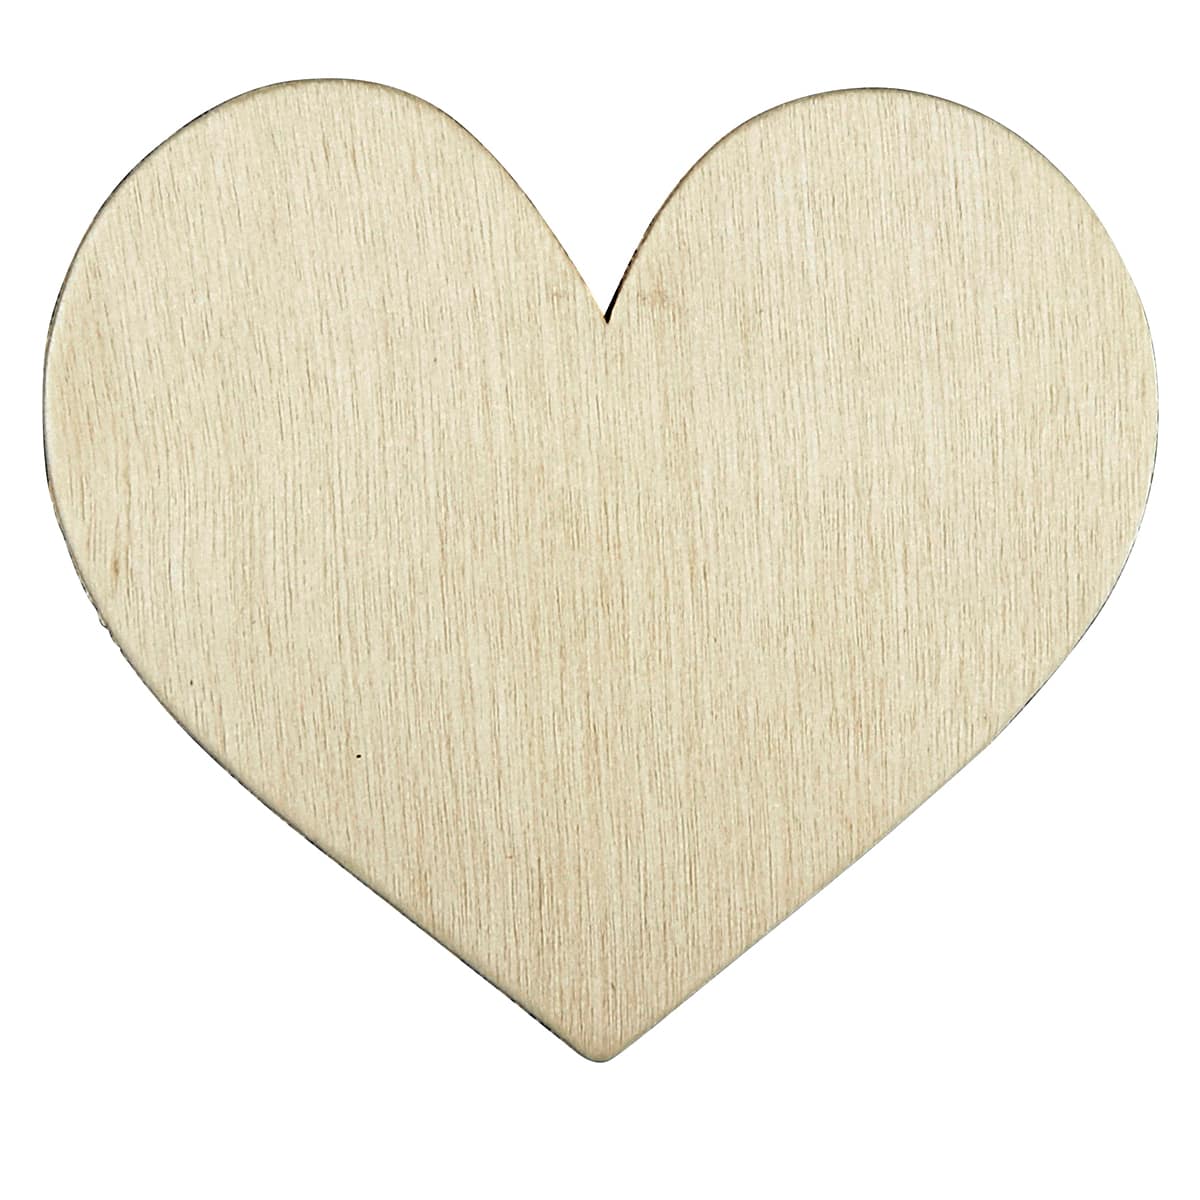 Get the Heart Wood Simple Shape by 